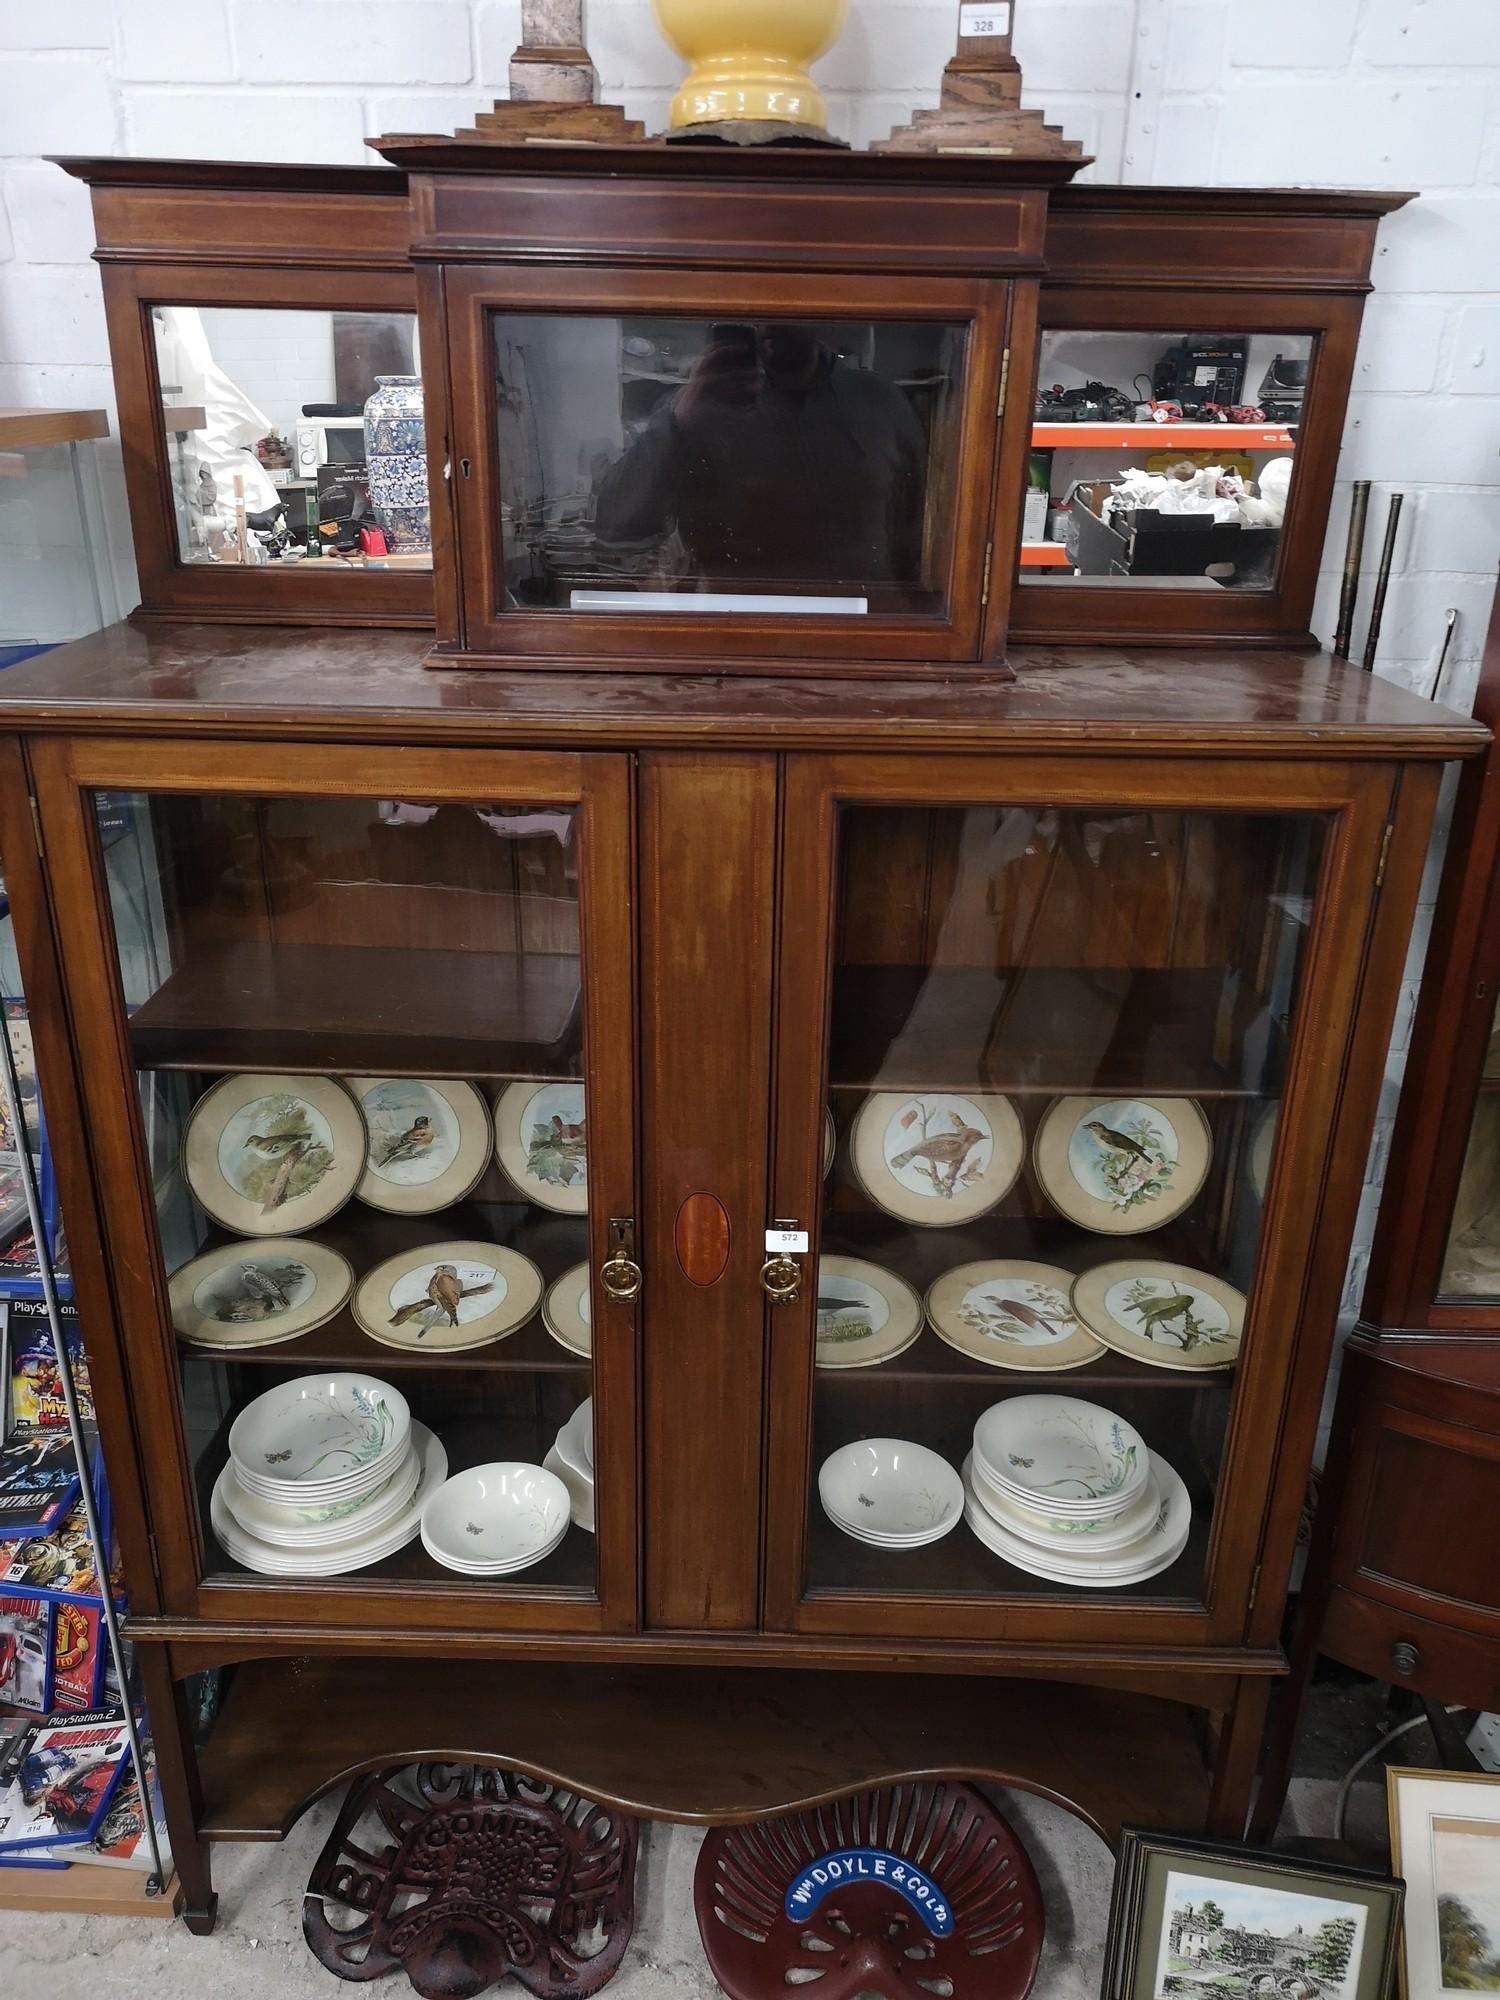 Large Edwardian inlaid dresser with 2 glass fronted doors with mirror back. - Image 2 of 2